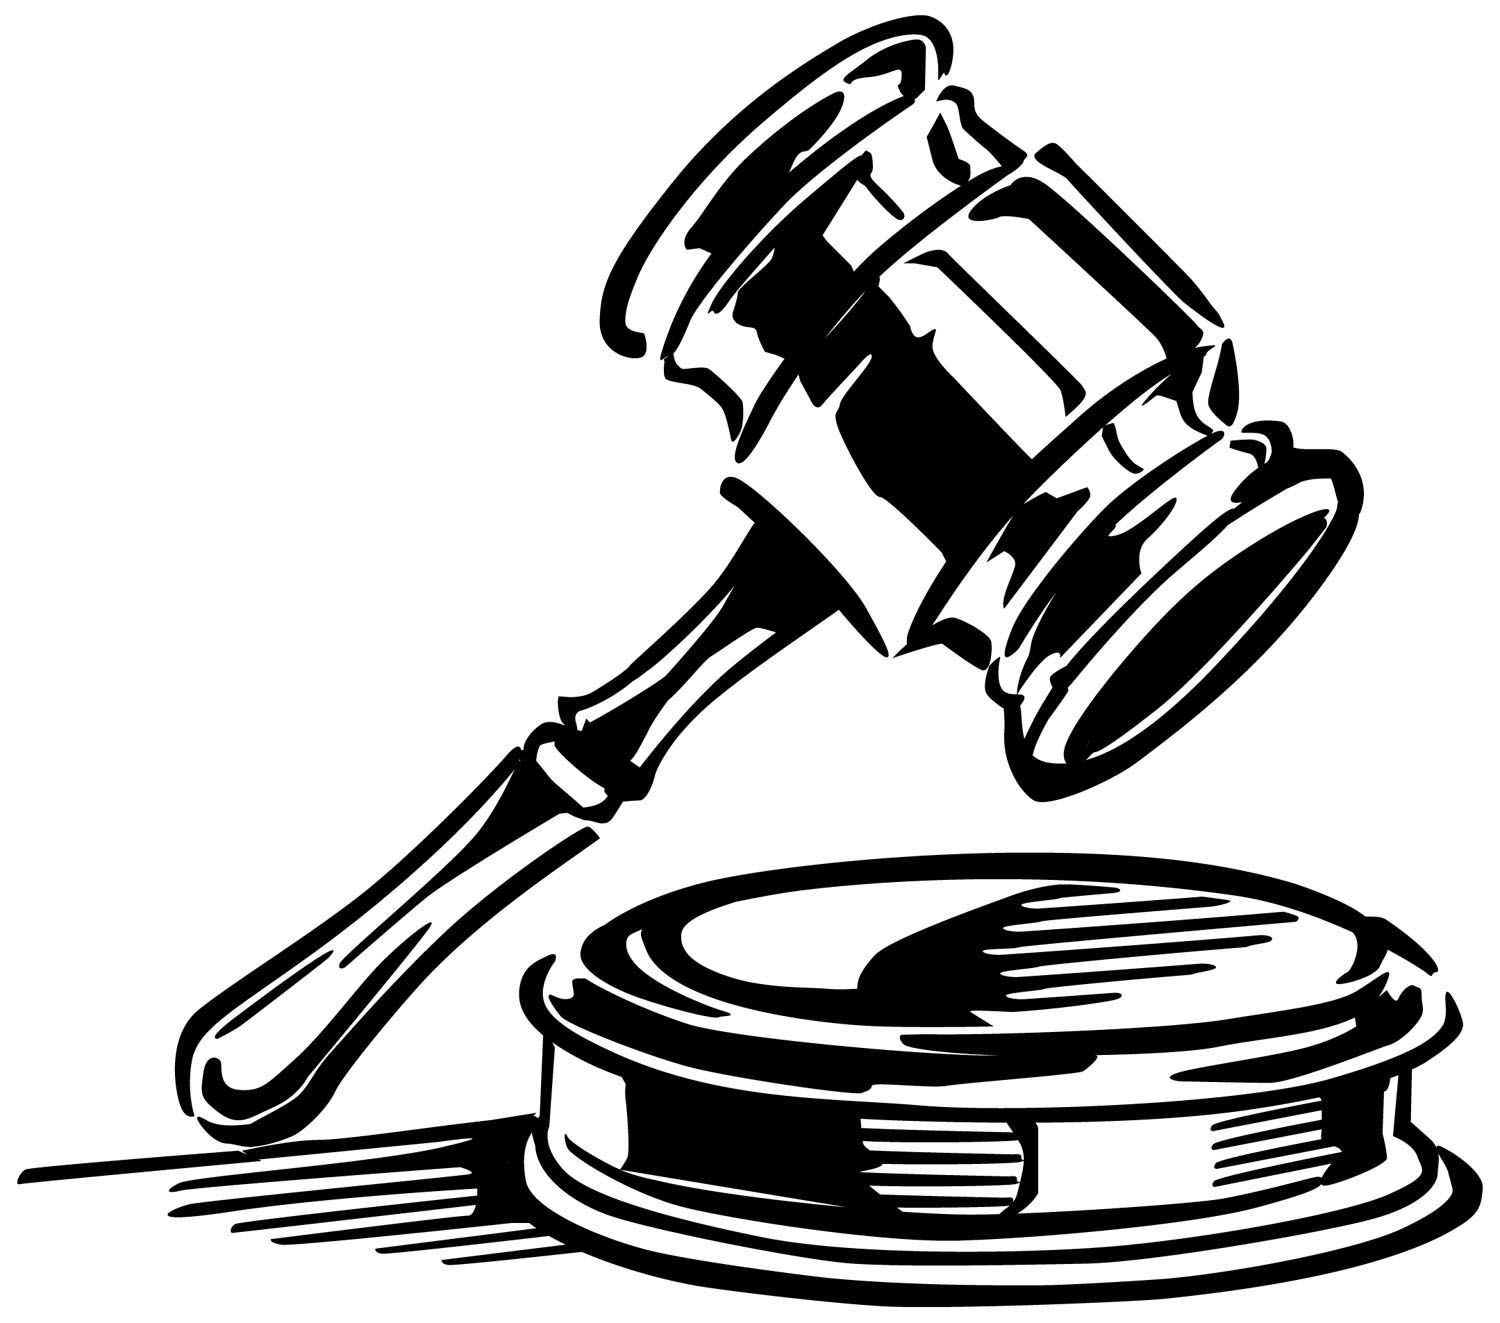 gavel clipart - DriverLayer Search Engine